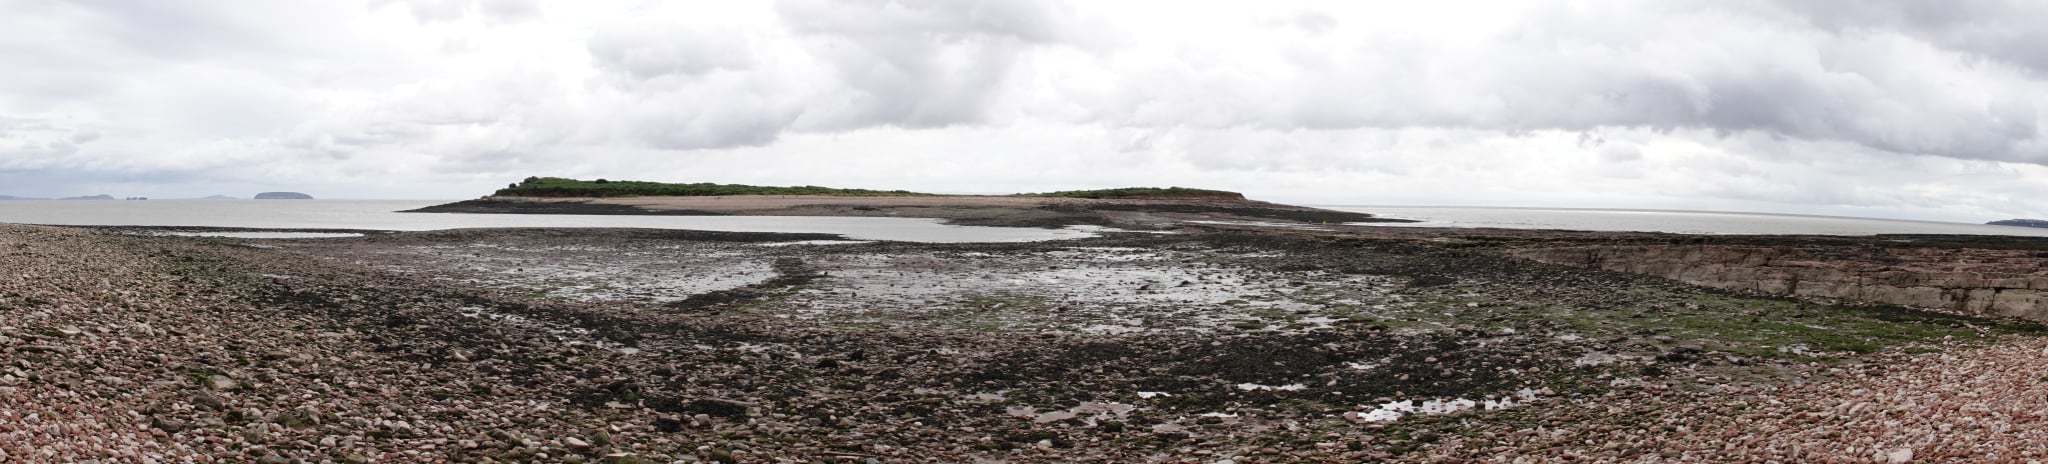 n amazing picture of Sully Island at low tide by John Wilson